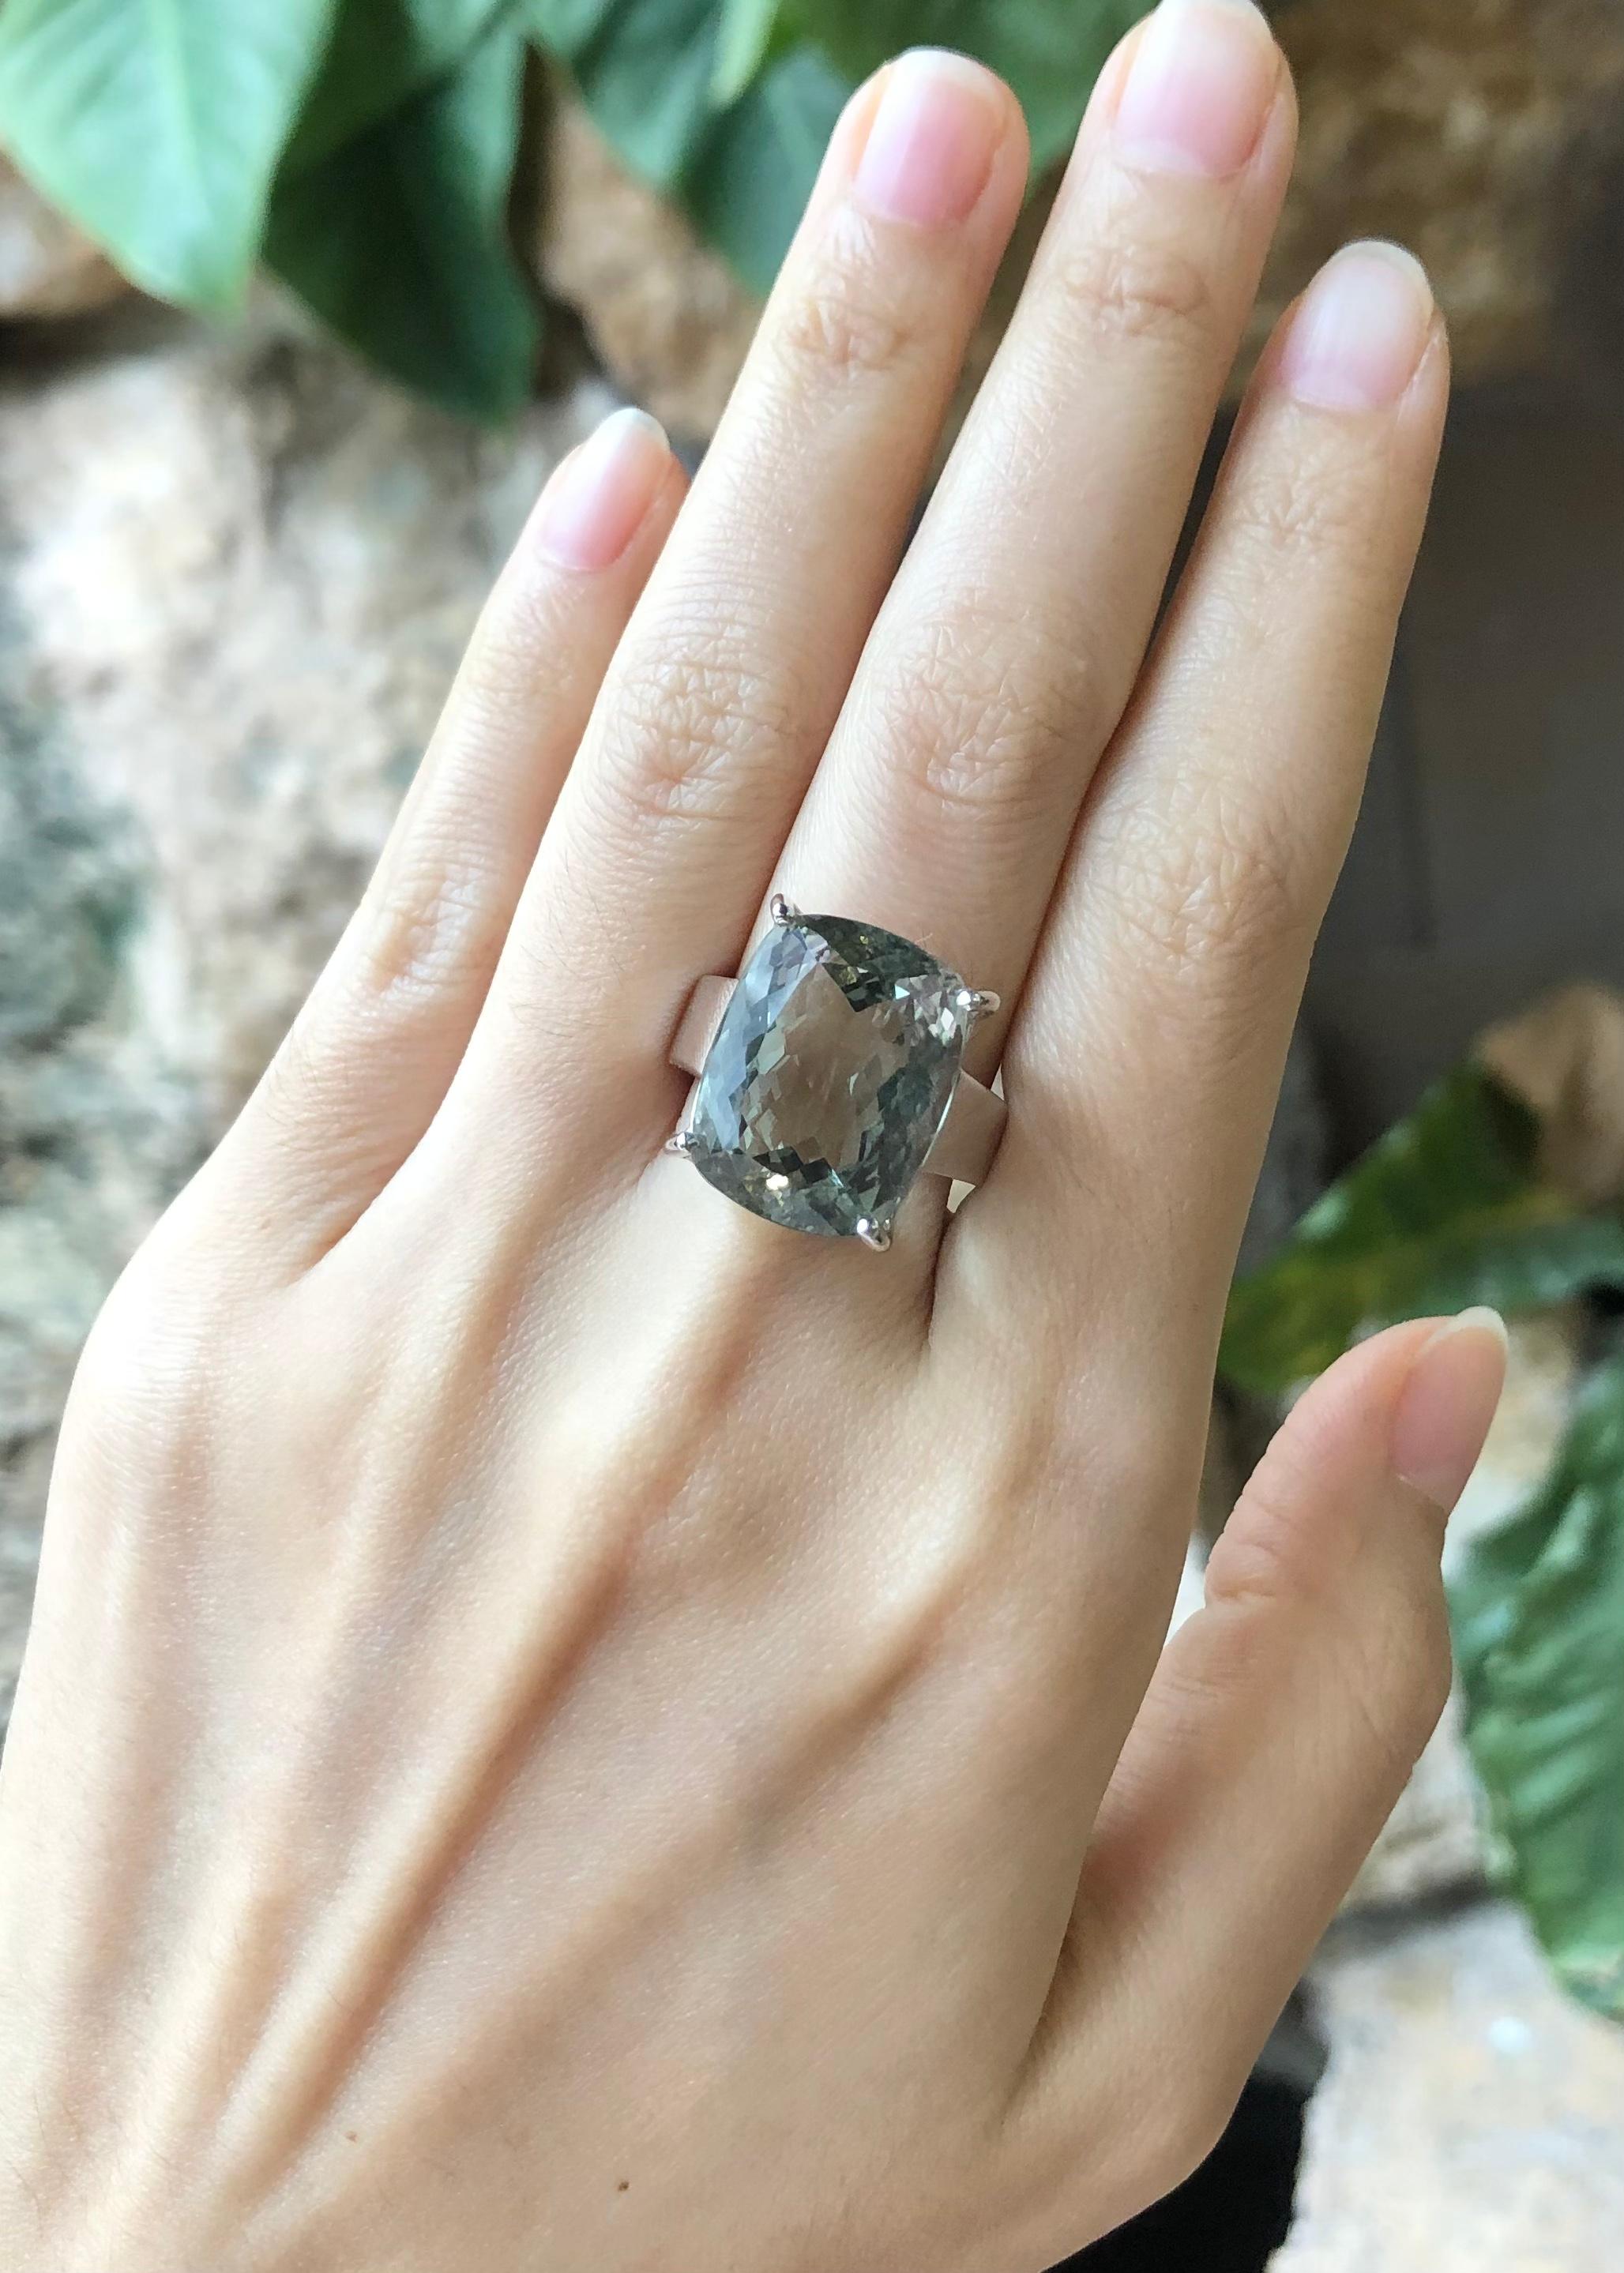 Green Amethyst Ring set in Silver Settings

Width:  1.4 cm 
Length: 1.8 cm
Ring Size: 56
Total Weight: 11.45 grams

*Please note that the silver setting is plated with rhodium to promote shine and help prevent oxidation.  However, with the nature of